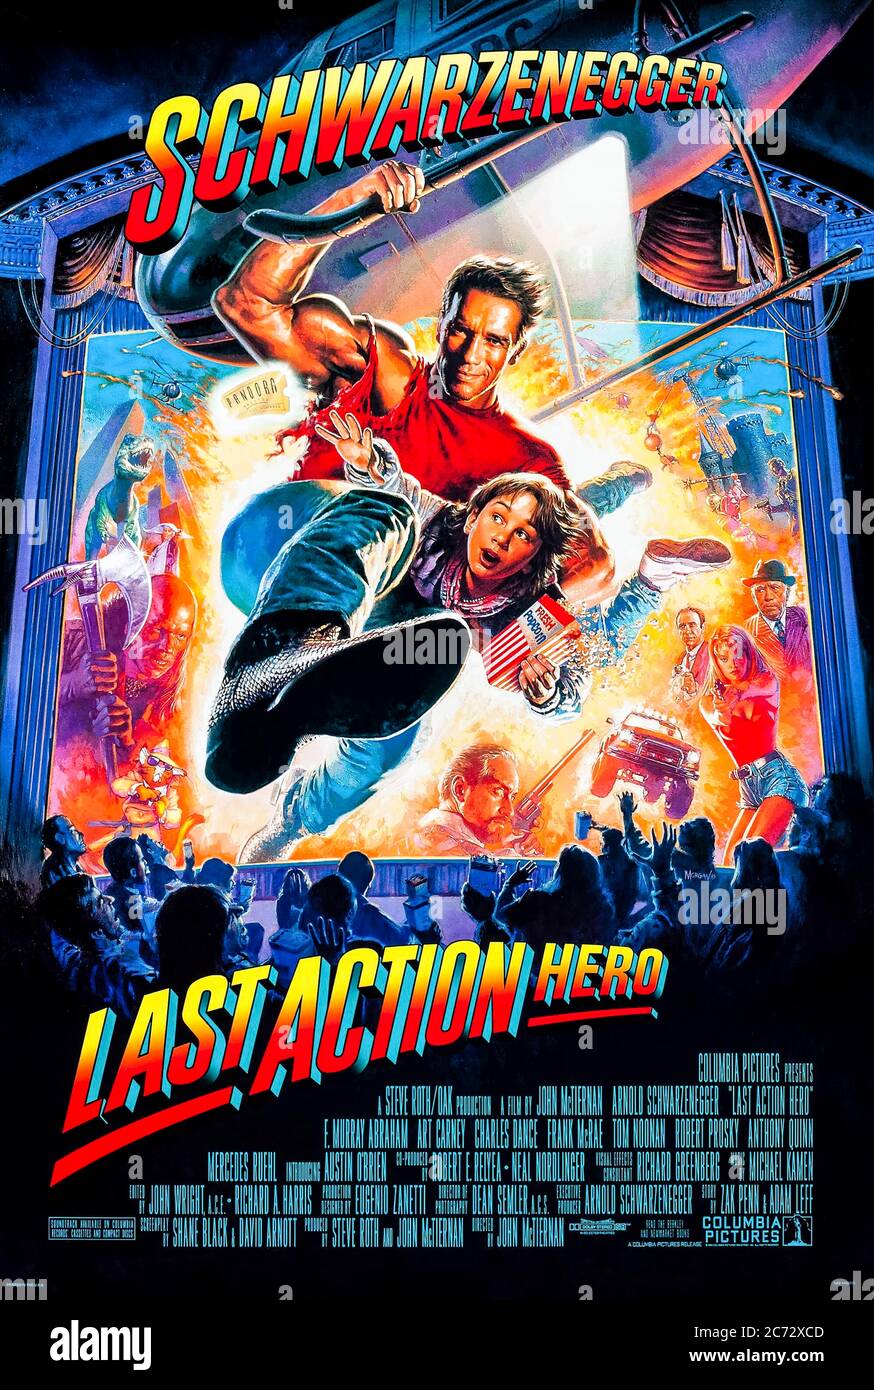 Last Action Hero (1993) directed by John McTiernan and starring Arnold Schwarzenegger, F. Murray Abraham, Art Carney and Charles Dance. A child gets transported into the movie by a magic ticket but must stop the bad guy escaping into the real world. Stock Photo